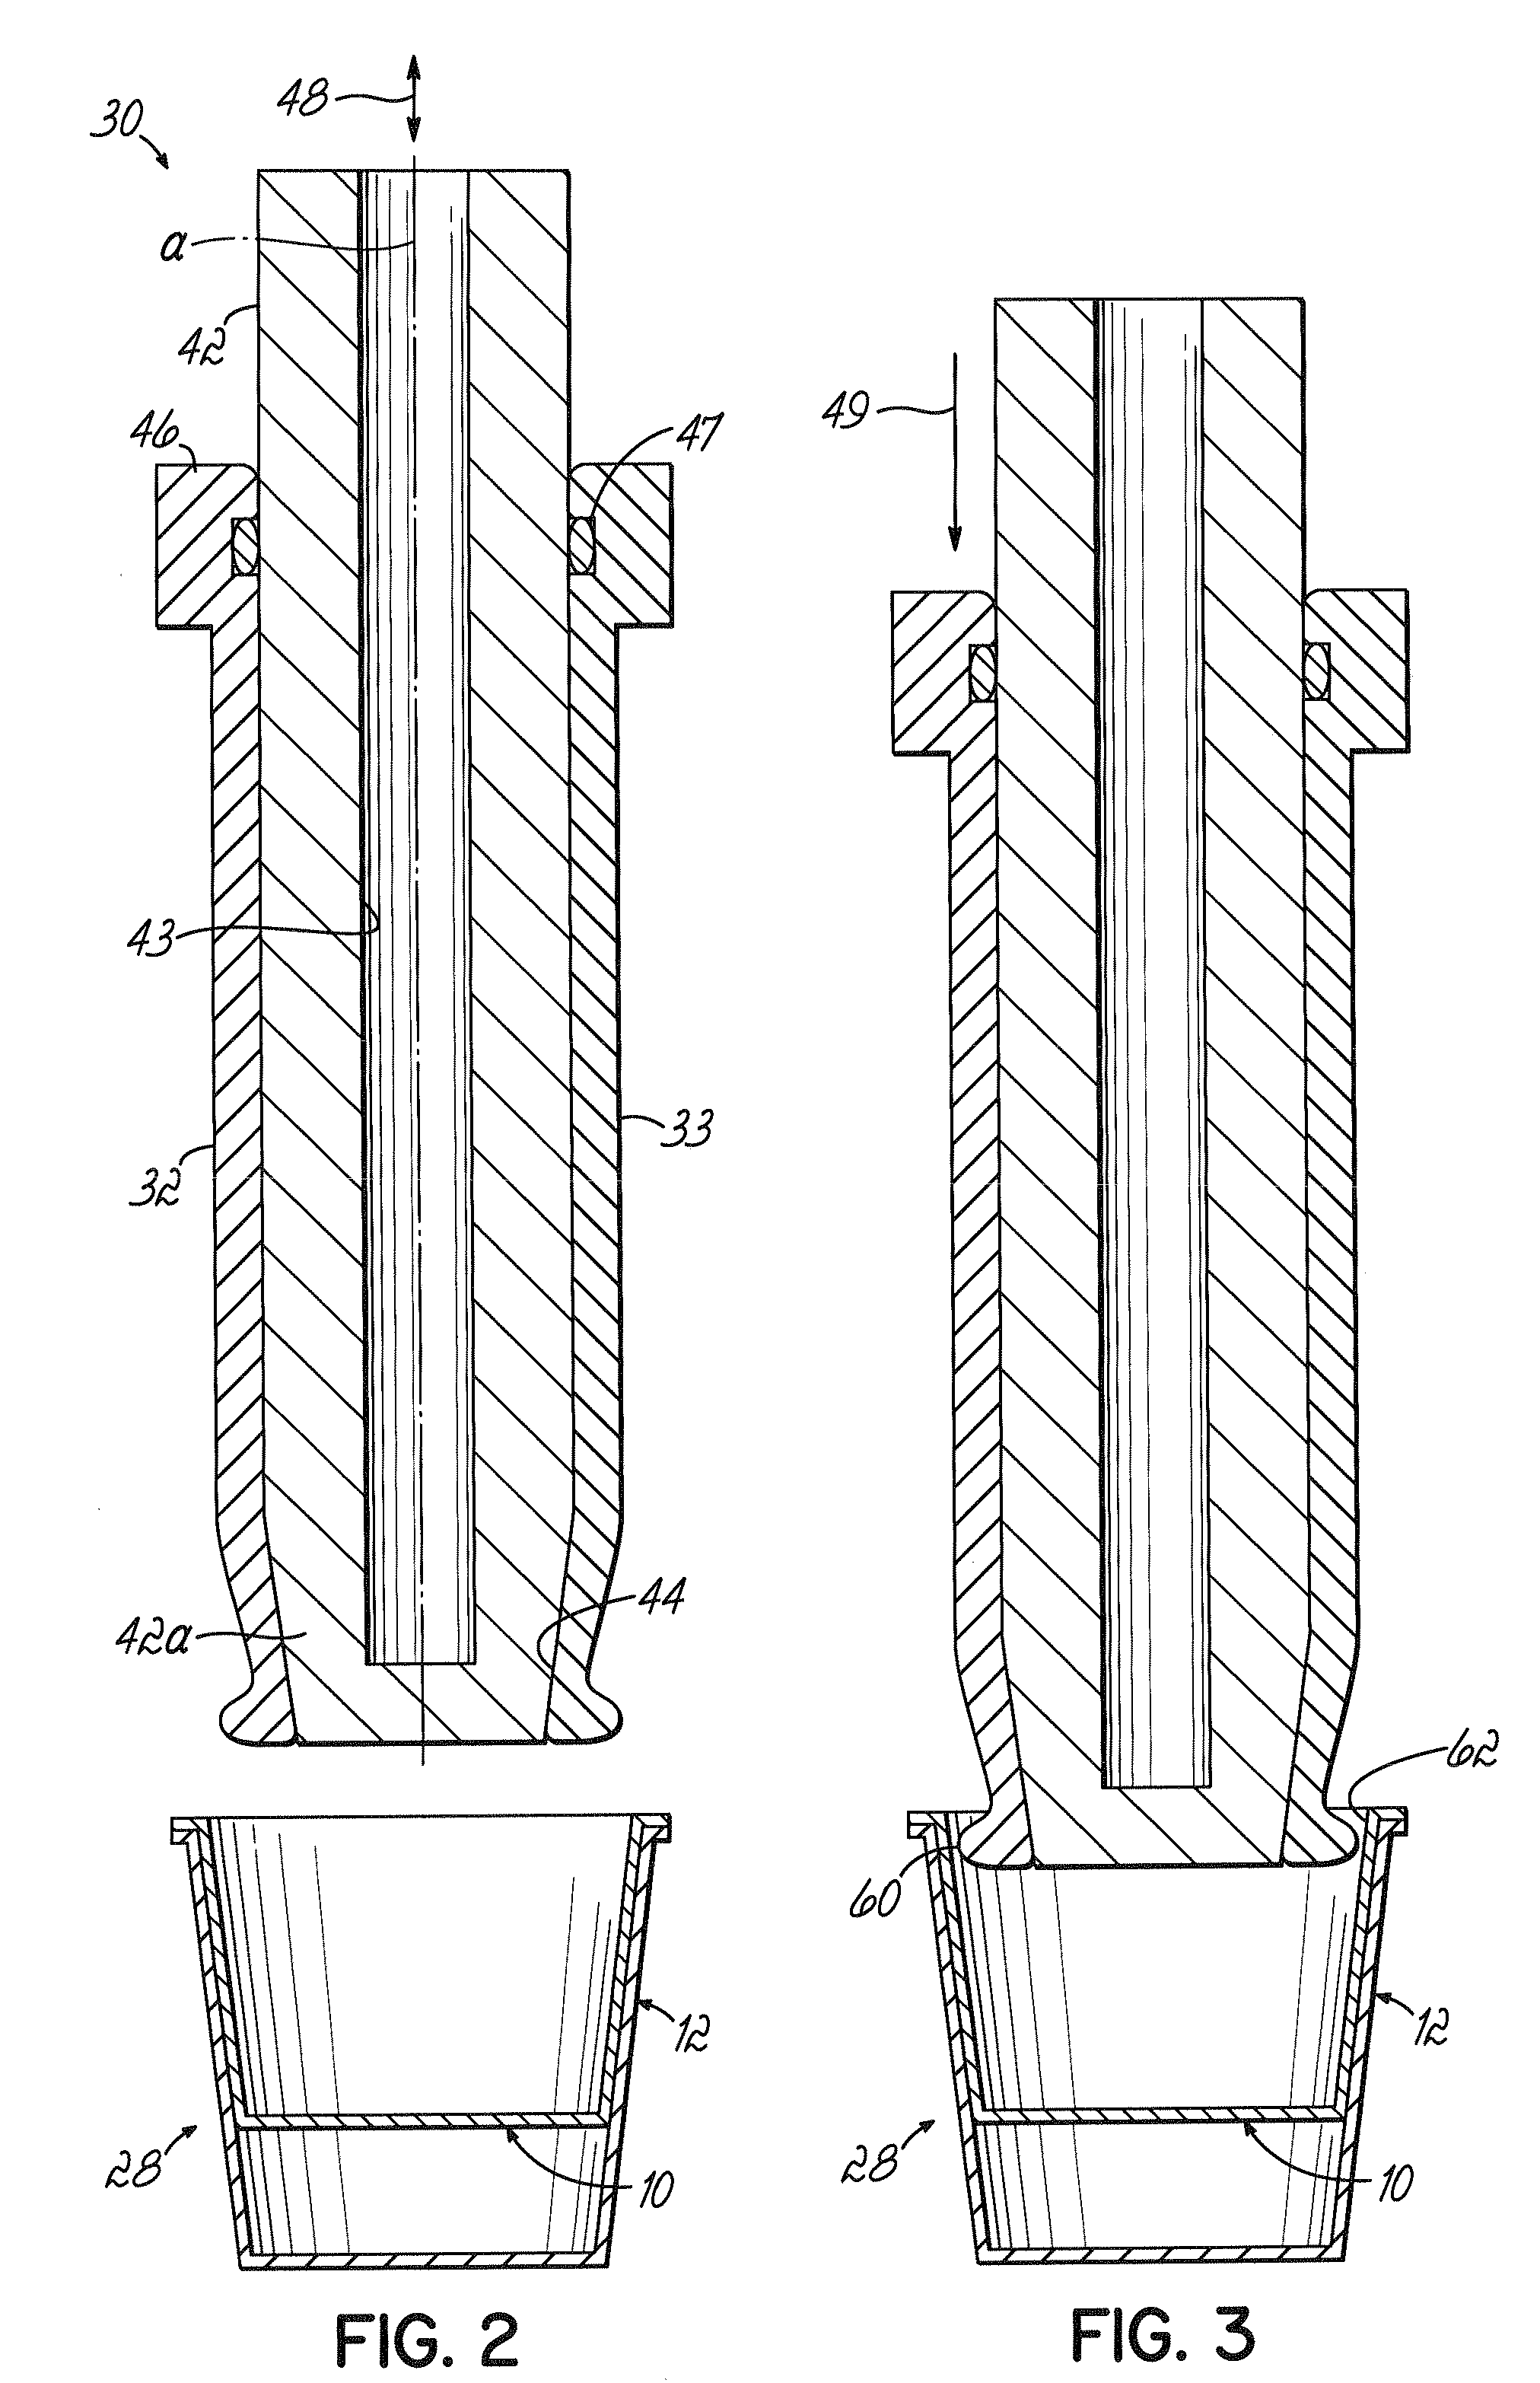 Apparatus and methods for placing and attaching formed filters into brewing cups